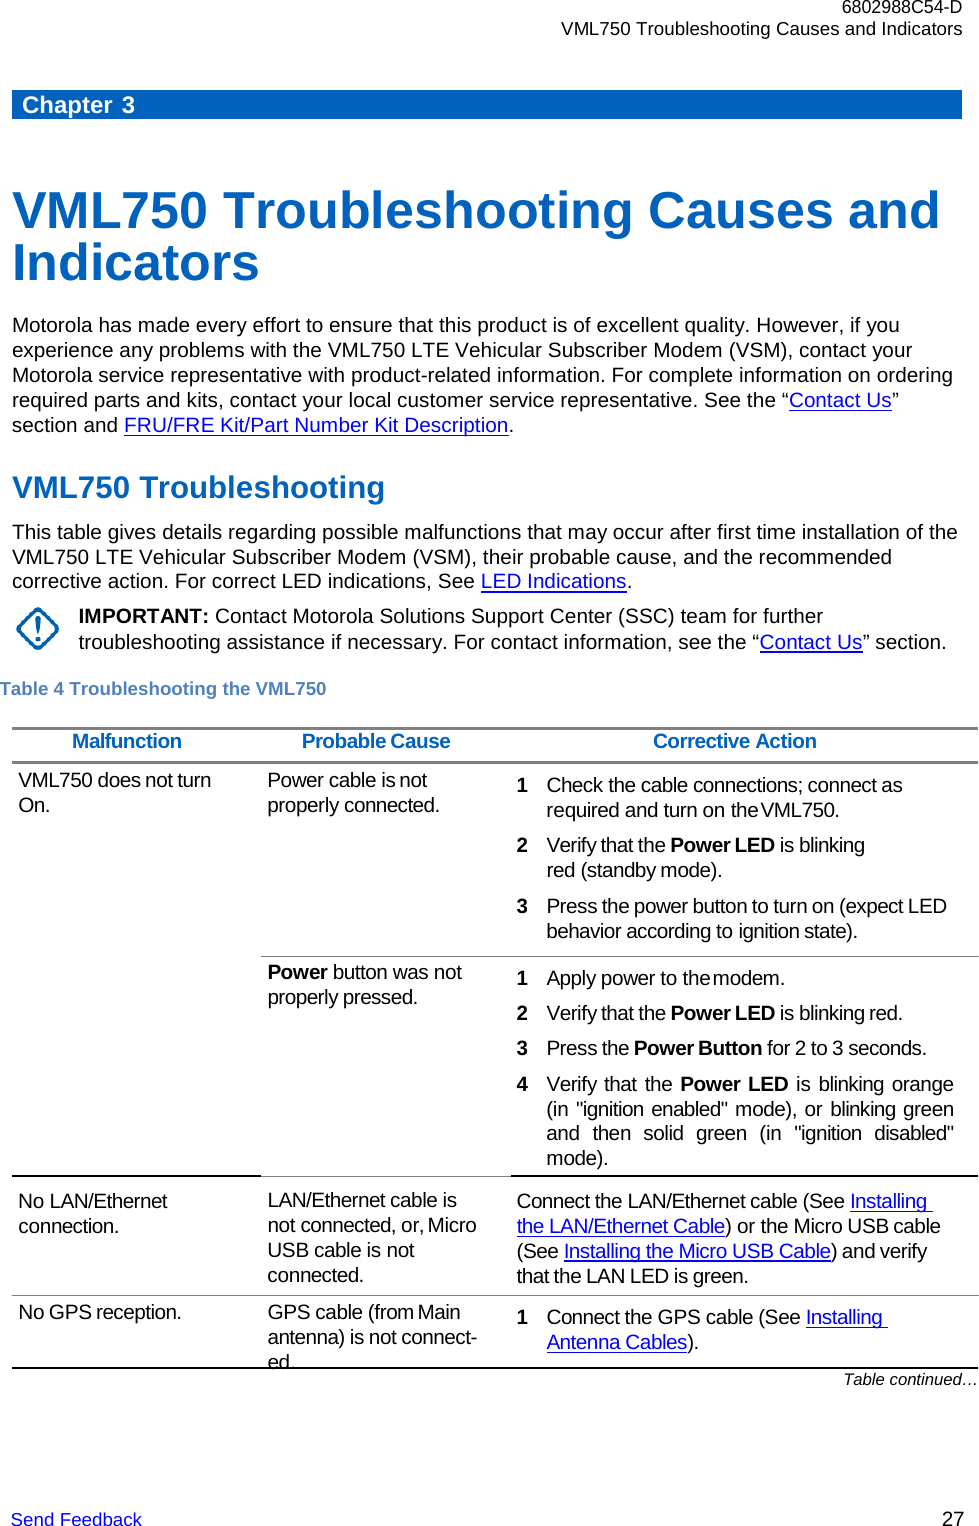 6802988C54-D VML750 Troubleshooting Causes and Indicators Send Feedback 27       Chapter 3    VML750 Troubleshooting Causes and Indicators Motorola has made every effort to ensure that this product is of excellent quality. However, if you experience any problems with the VML750 LTE Vehicular Subscriber Modem (VSM), contact your Motorola service representative with product-related information. For complete information on ordering required parts and kits, contact your local customer service representative. See the “Contact Us” section and FRU/FRE Kit/Part Number Kit Description.  VML750 Troubleshooting This table gives details regarding possible malfunctions that may occur after first time installation of the VML750 LTE Vehicular Subscriber Modem (VSM), their probable cause, and the recommended corrective action. For correct LED indications, See LED Indications. IMPORTANT: Contact Motorola Solutions Support Center (SSC) team for further troubleshooting assistance if necessary. For contact information, see the “Contact Us” section.  Table 4 Troubleshooting the VML750  Malfunction Probable Cause Corrective Action VML750 does not turn On. Power cable is not properly connected.       Power button was not properly pressed.  1 Check the cable connections; connect as required and turn on the VML750. 2 Verify that the Power LED is blinking red (standby mode). 3 Press the power button to turn on (expect LED behavior according to ignition state).  1 Apply power to the modem. 2 Verify that the Power LED is blinking red. 3 Press the Power Button for 2 to 3 seconds. 4 Verify that the Power LED is blinking orange (in &quot;ignition enabled&quot; mode), or blinking green and  then solid green (in  &quot;ignition disabled&quot; mode). No LAN/Ethernet  connection. LAN/Ethernet cable is not connected, or, Micro USB cable is not connected. Connect the LAN/Ethernet cable (See Installing the LAN/Ethernet Cable) or the Micro USB cable (See Installing the Micro USB Cable) and verify that the LAN LED is green. No GPS reception. GPS cable (from Main antenna) is not connect- ed. 1 Connect the GPS cable (See Installing Antenna Cables). Table continued… 